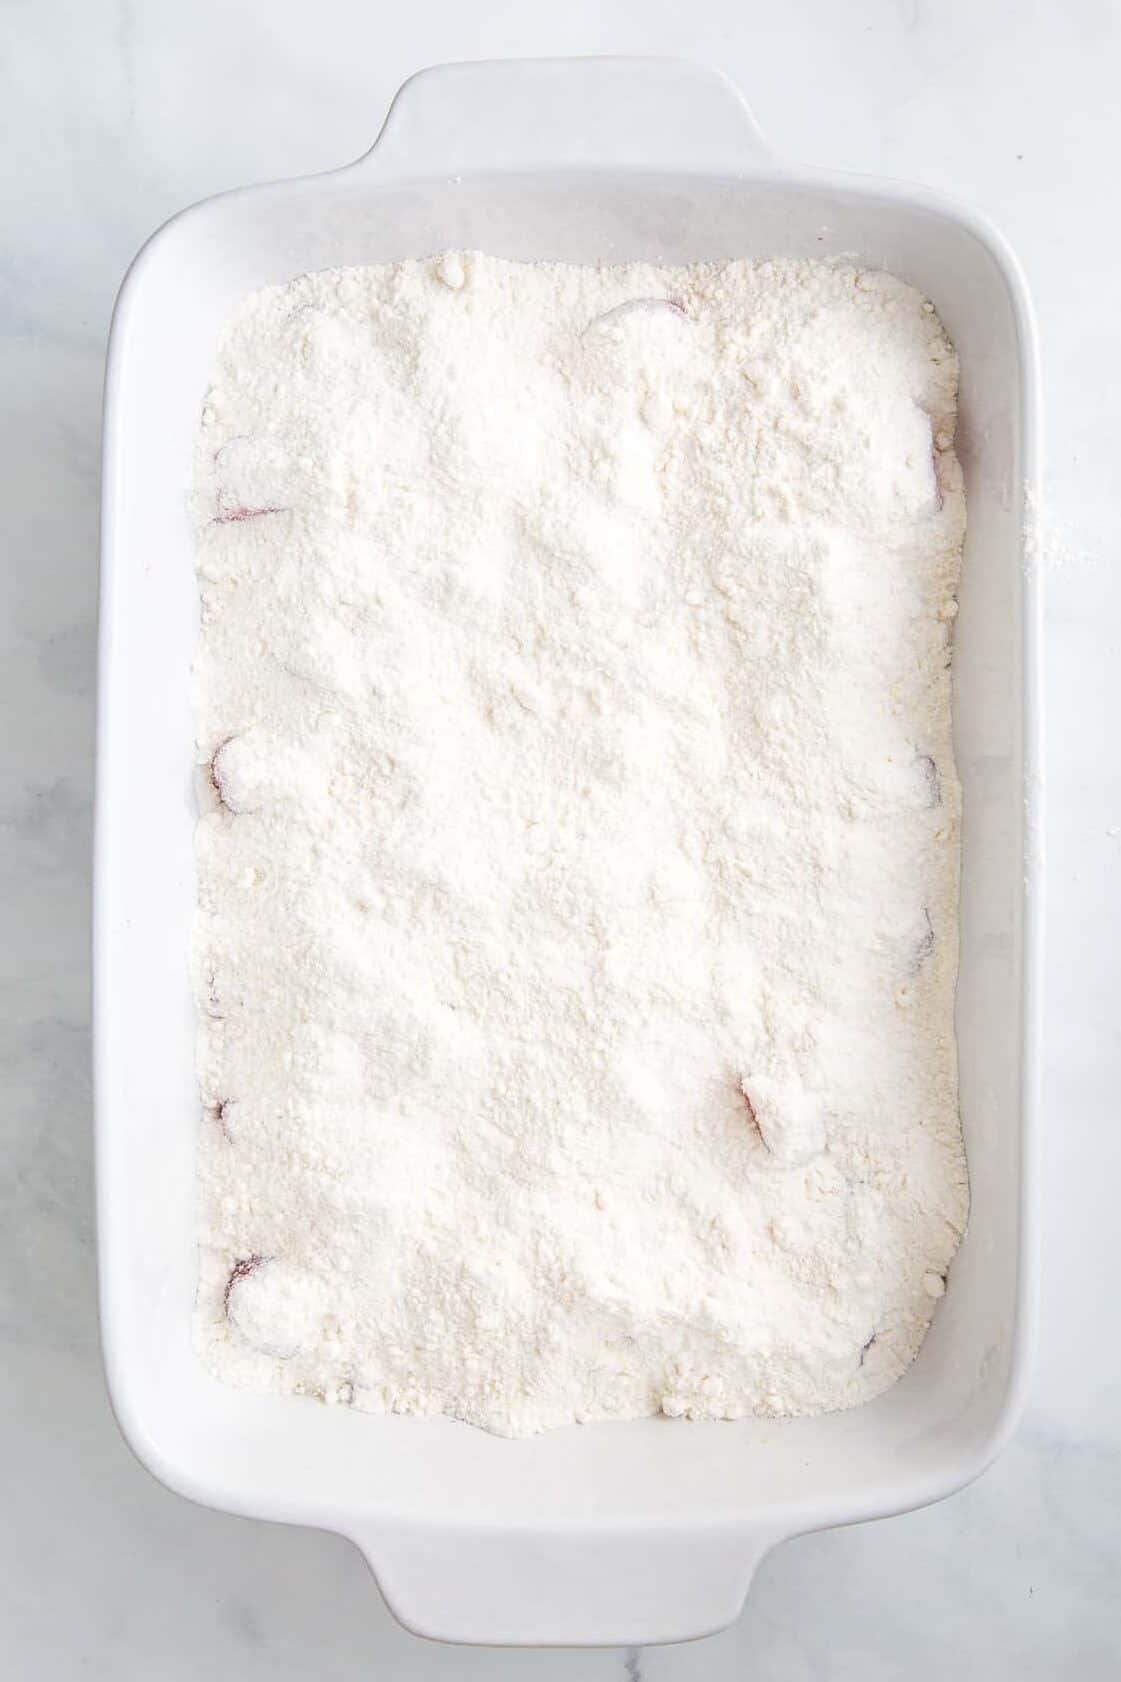 yellow cake mix layered on top of frozen berries and brown sugar in a 9x13 casserole dish